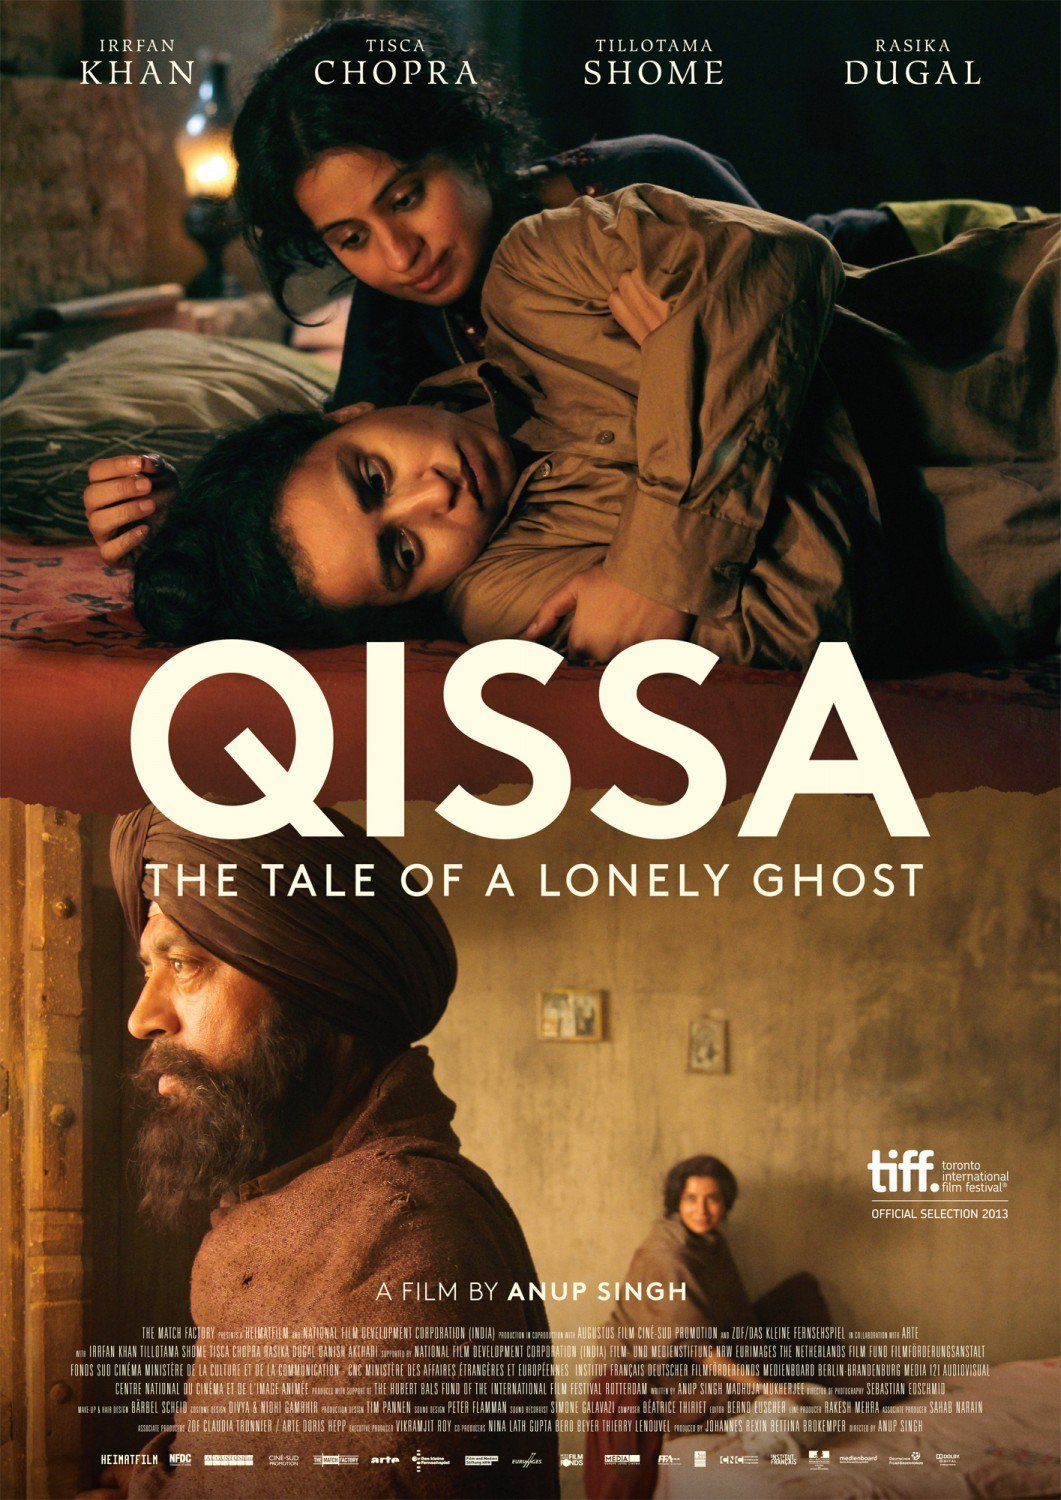 Qissa: The Tale of a Lonely Ghost For Dumb Charades